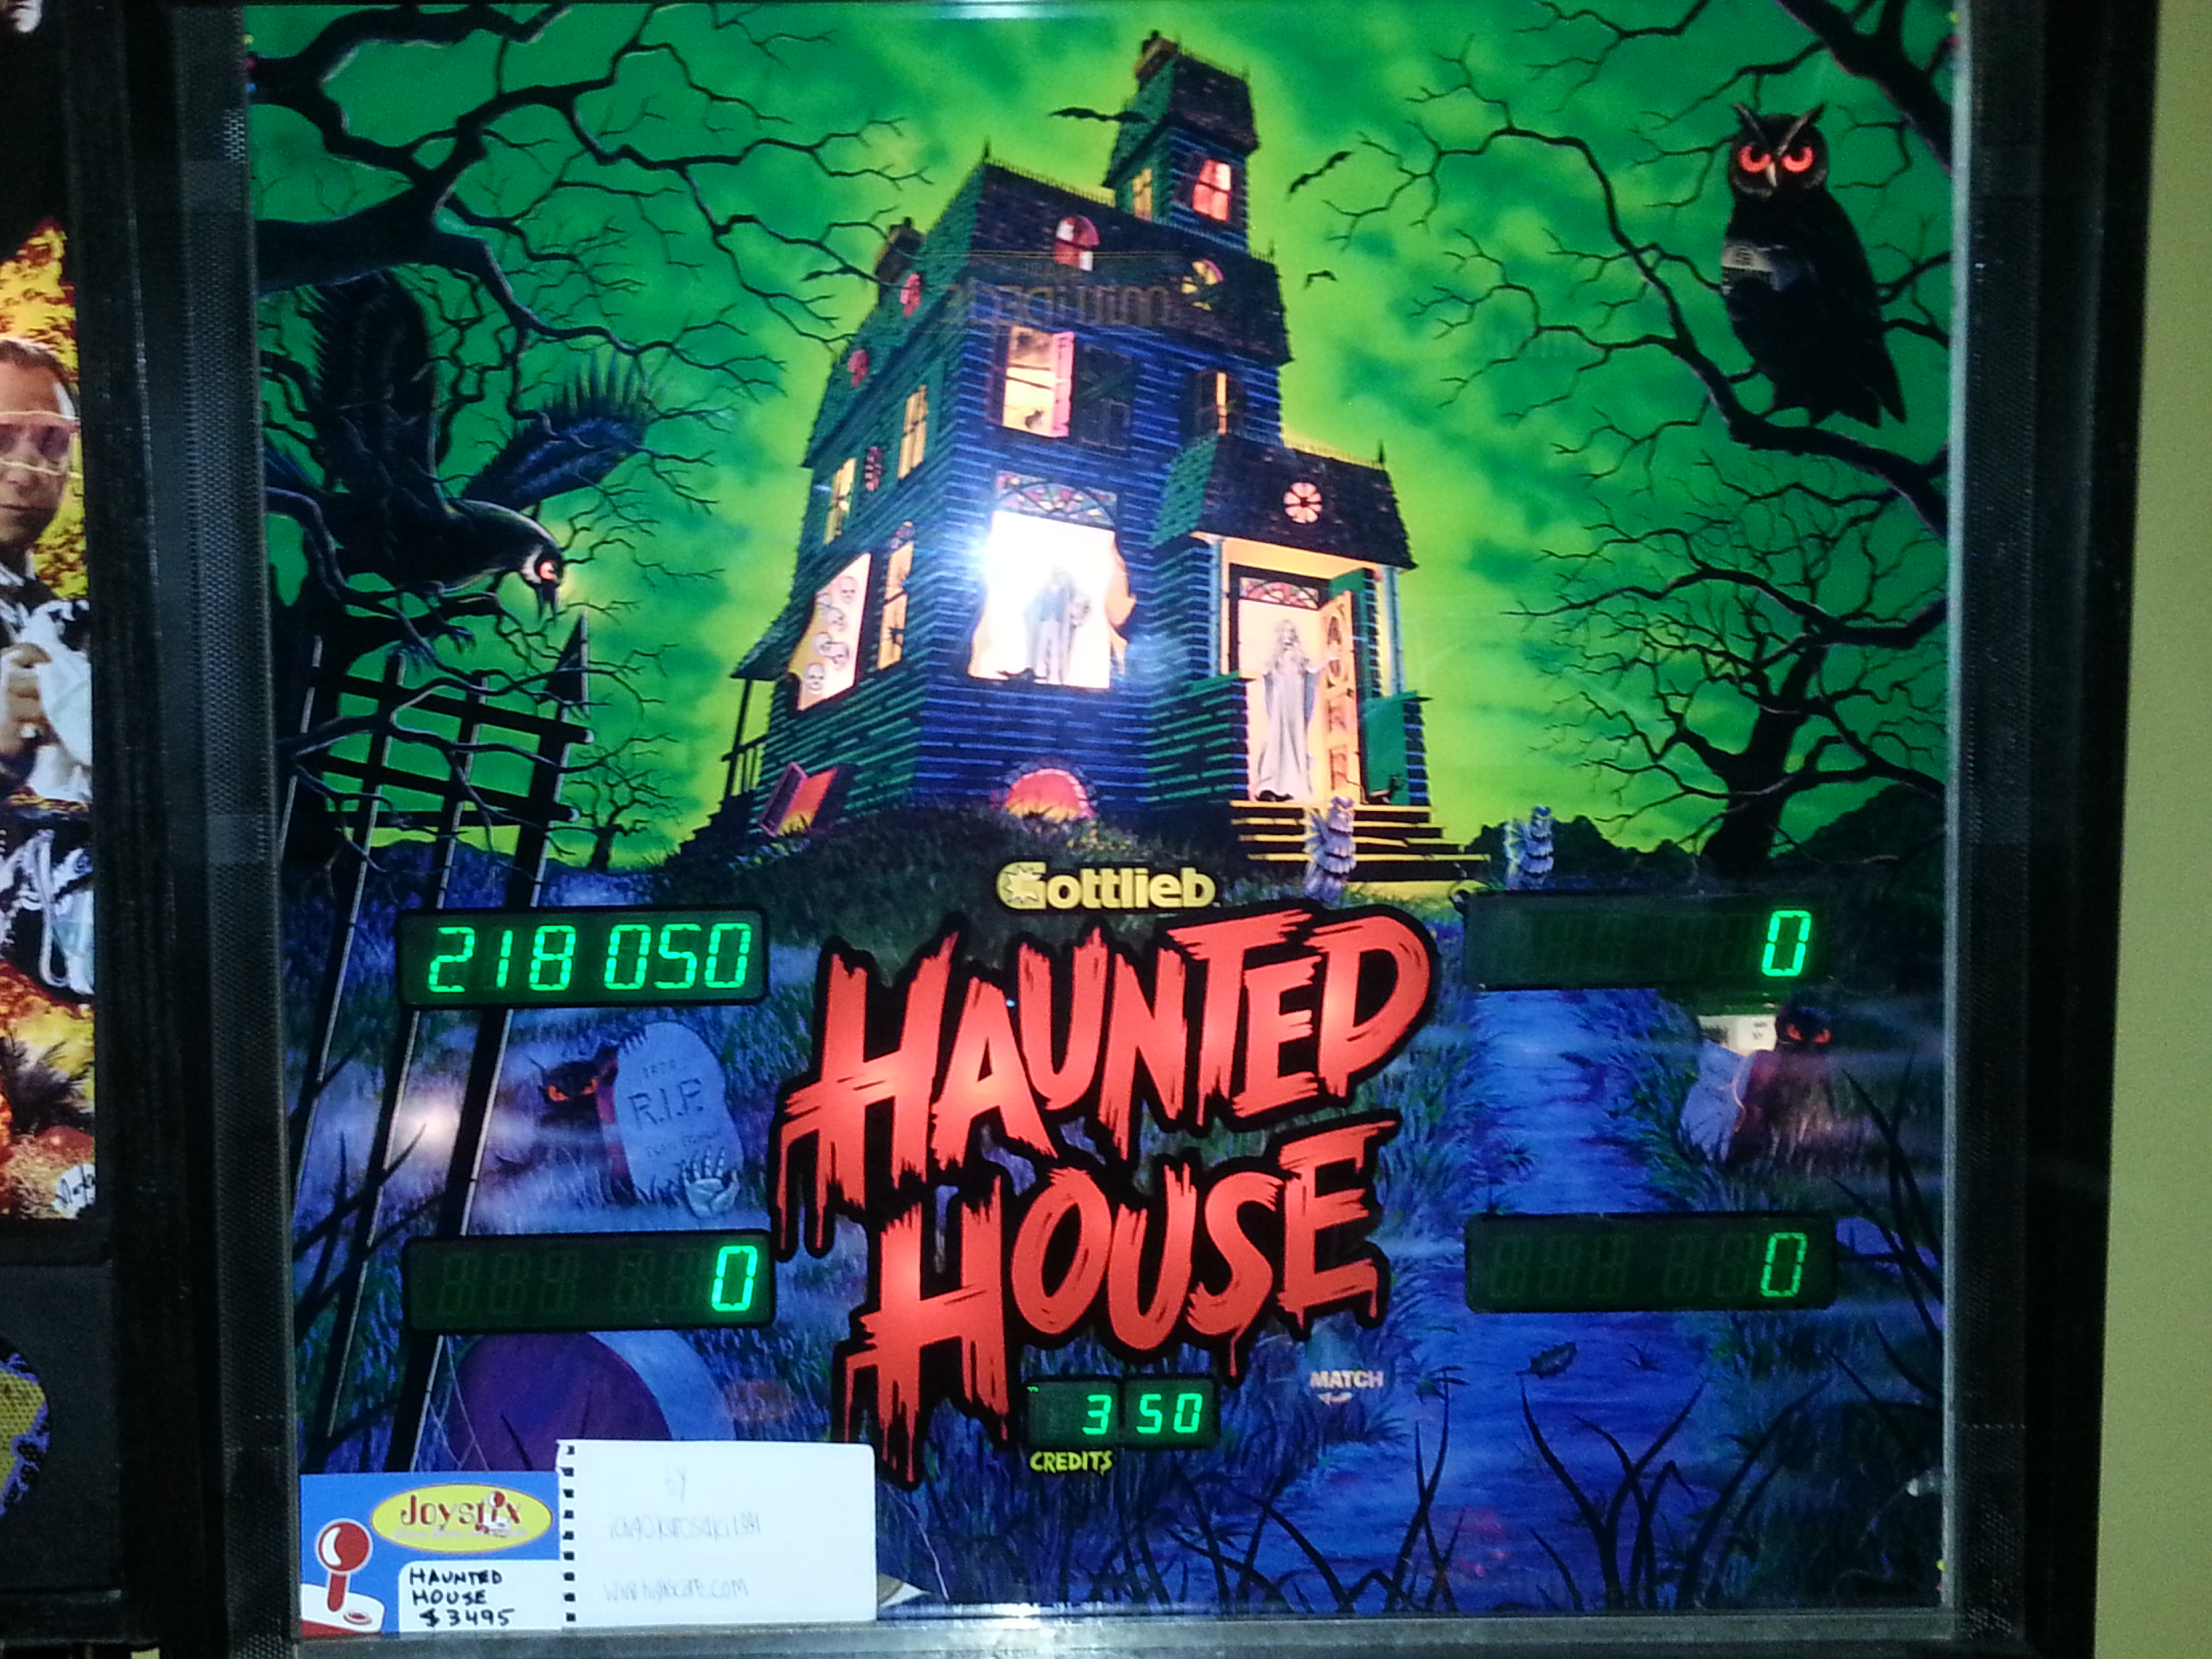 Haunted House 218,050 points